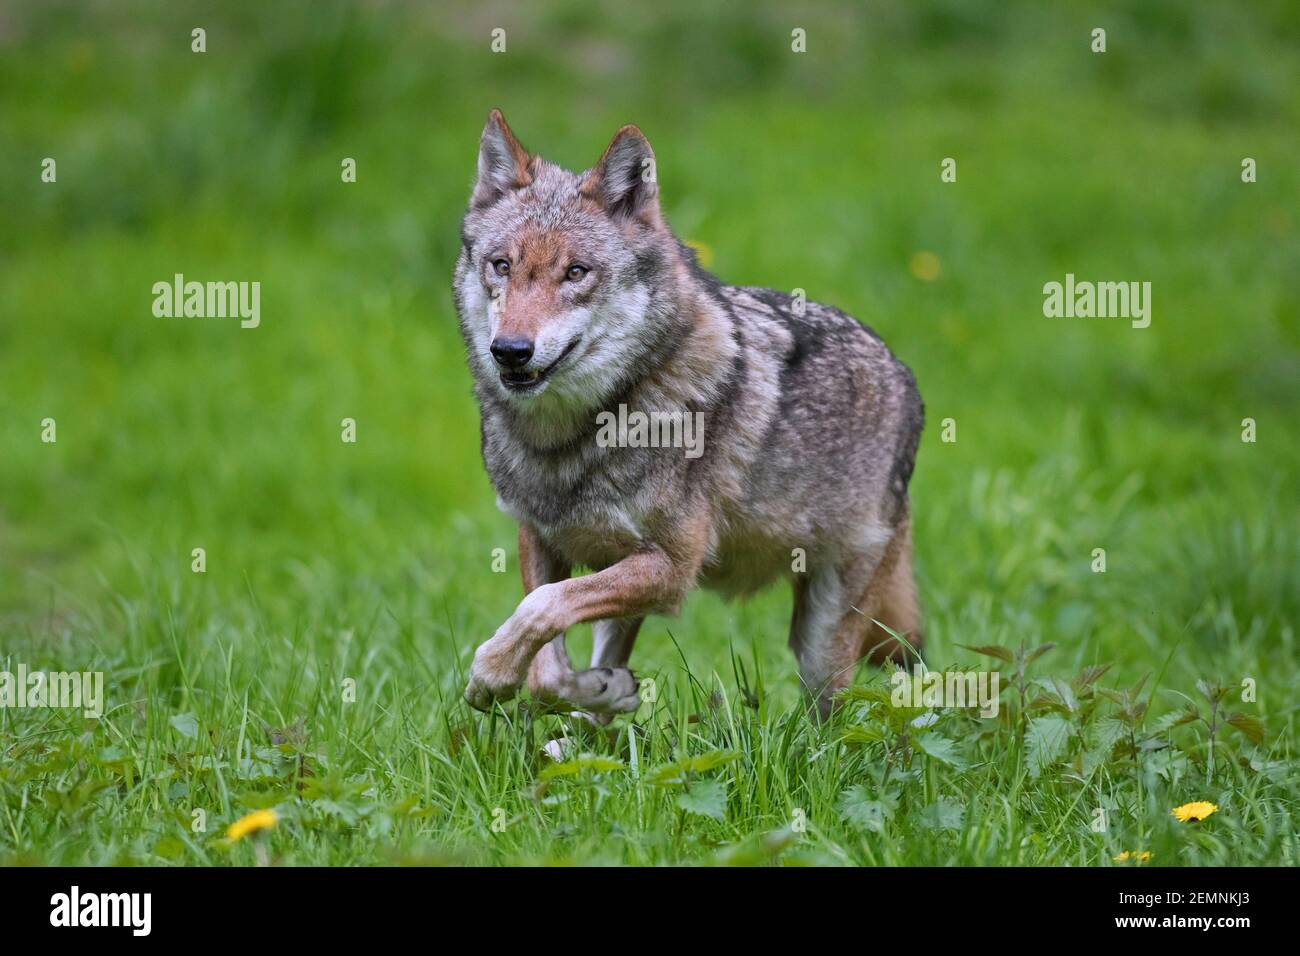 Solitary Eurasian wolf / European gray wolf / grey wolf (Canis lupus) running in meadow / grassland Stock Photo